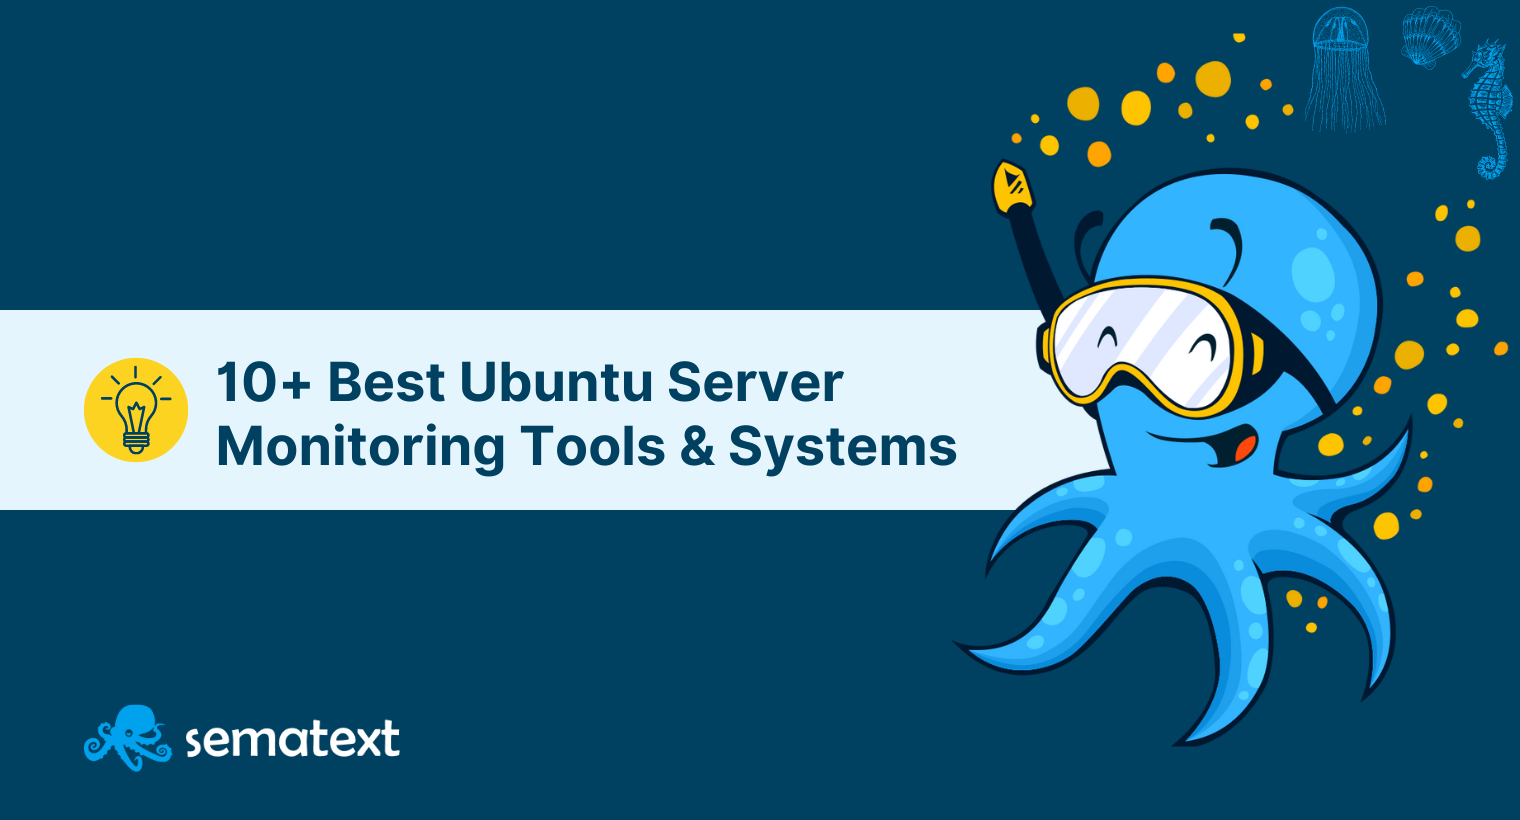 10+ Best Tools & Systems for Monitoring Ubuntu Server Performance [2023 Comparison]